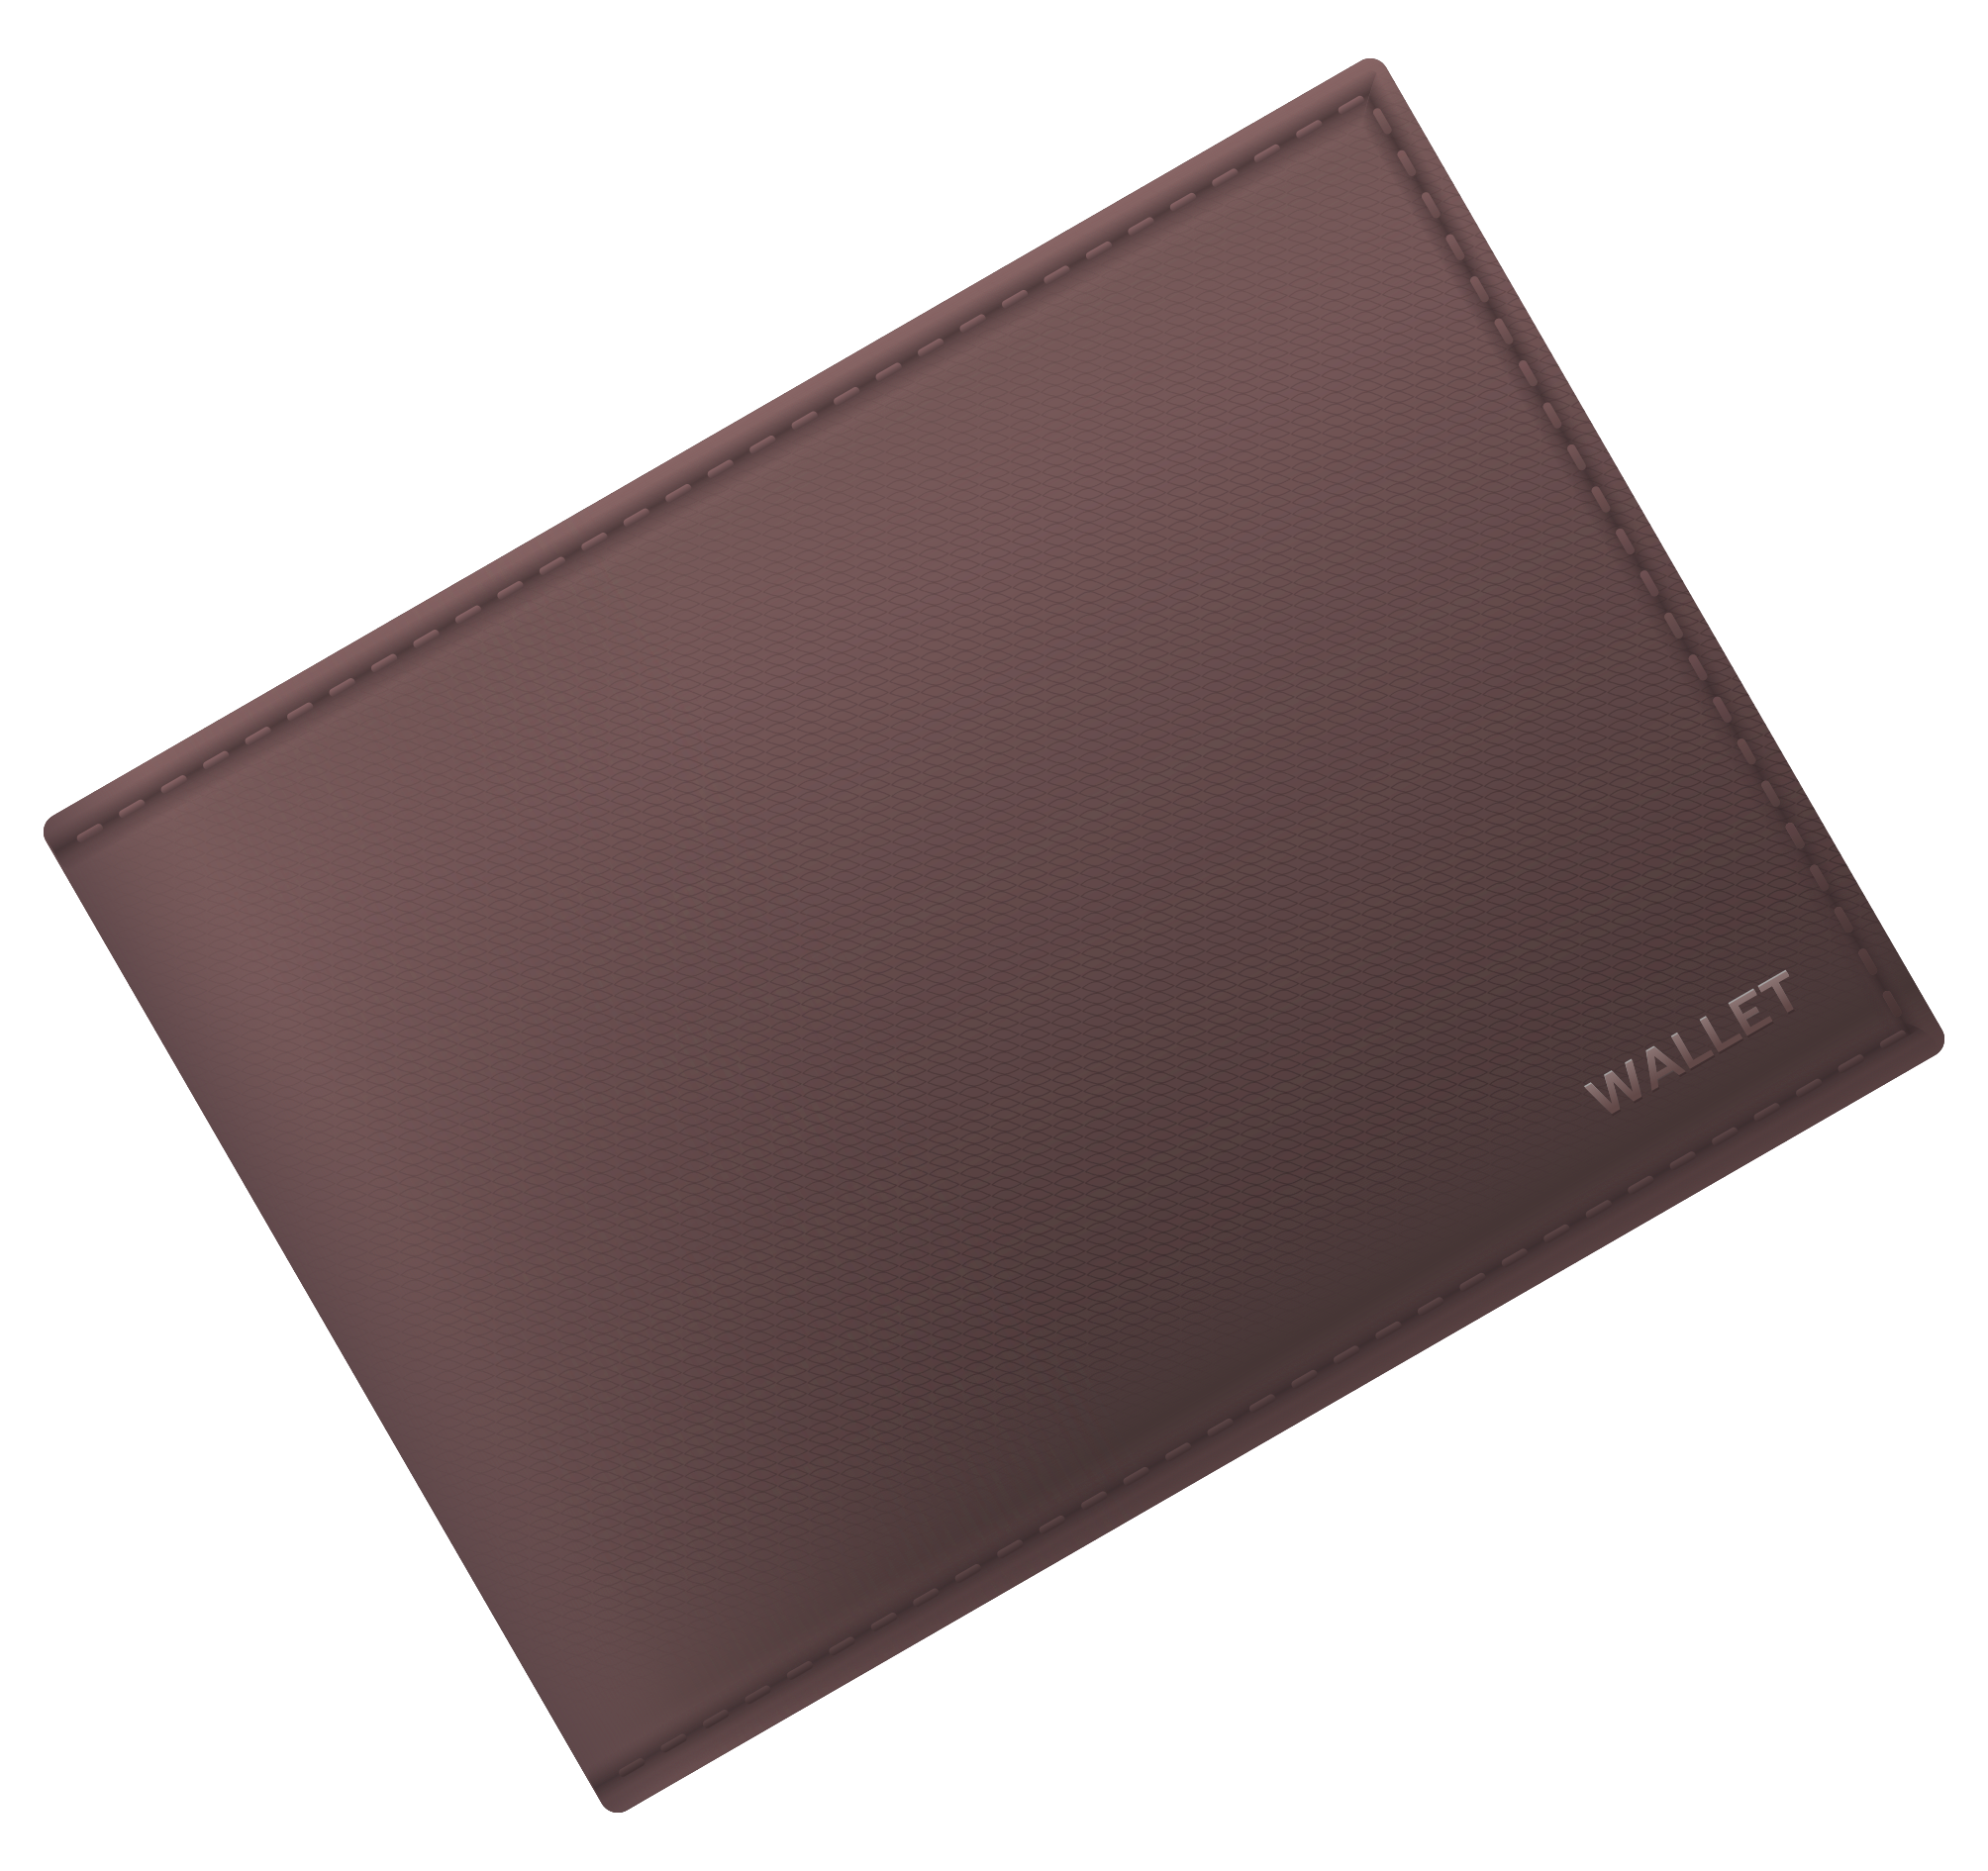 Wallet PNG HD and Transparent